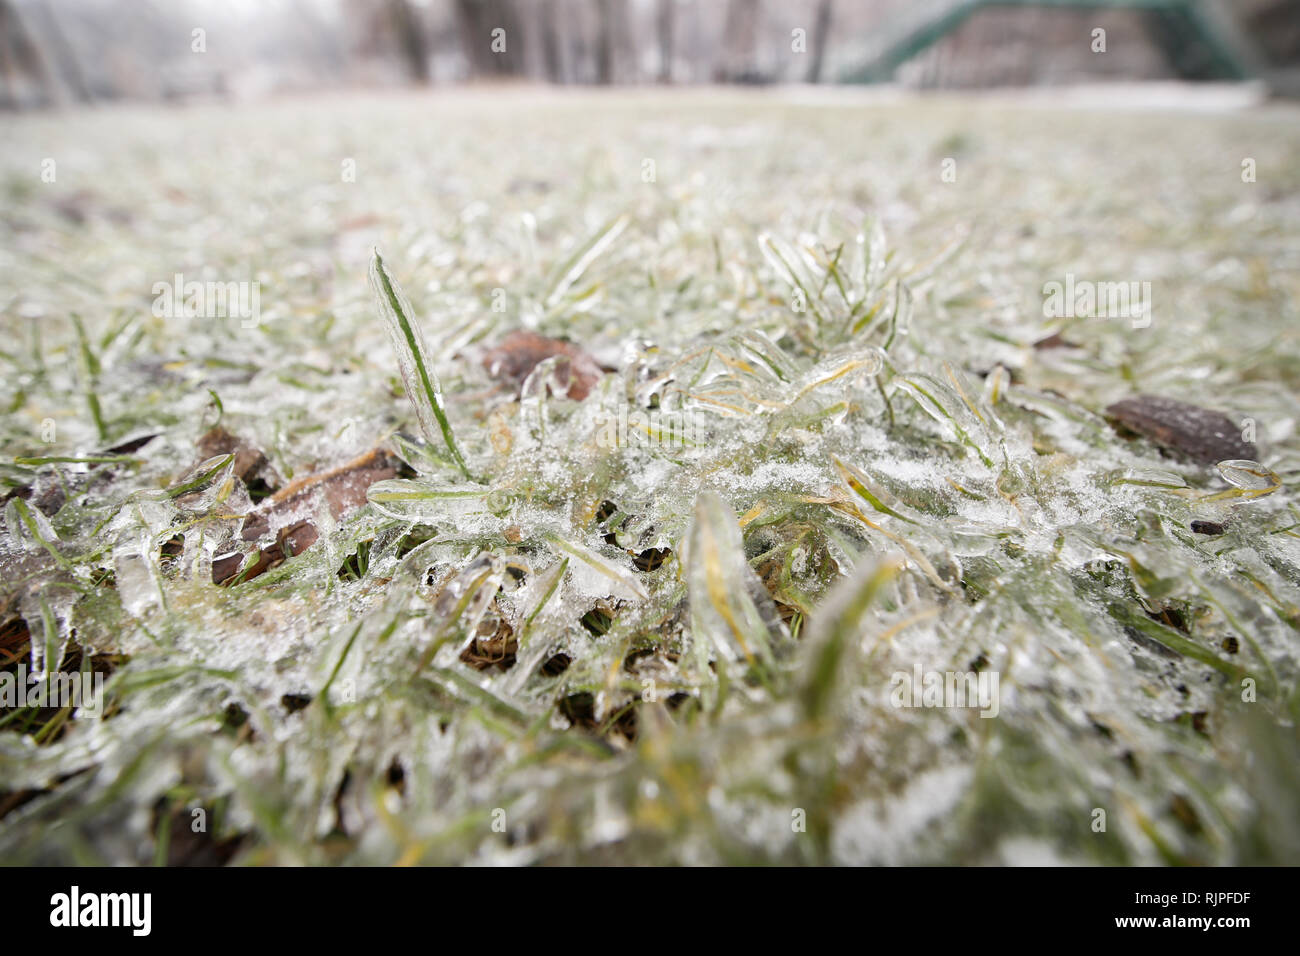 Frozen ground and vegetation during winter after a freezing rain weather phenomenon Stock Photo